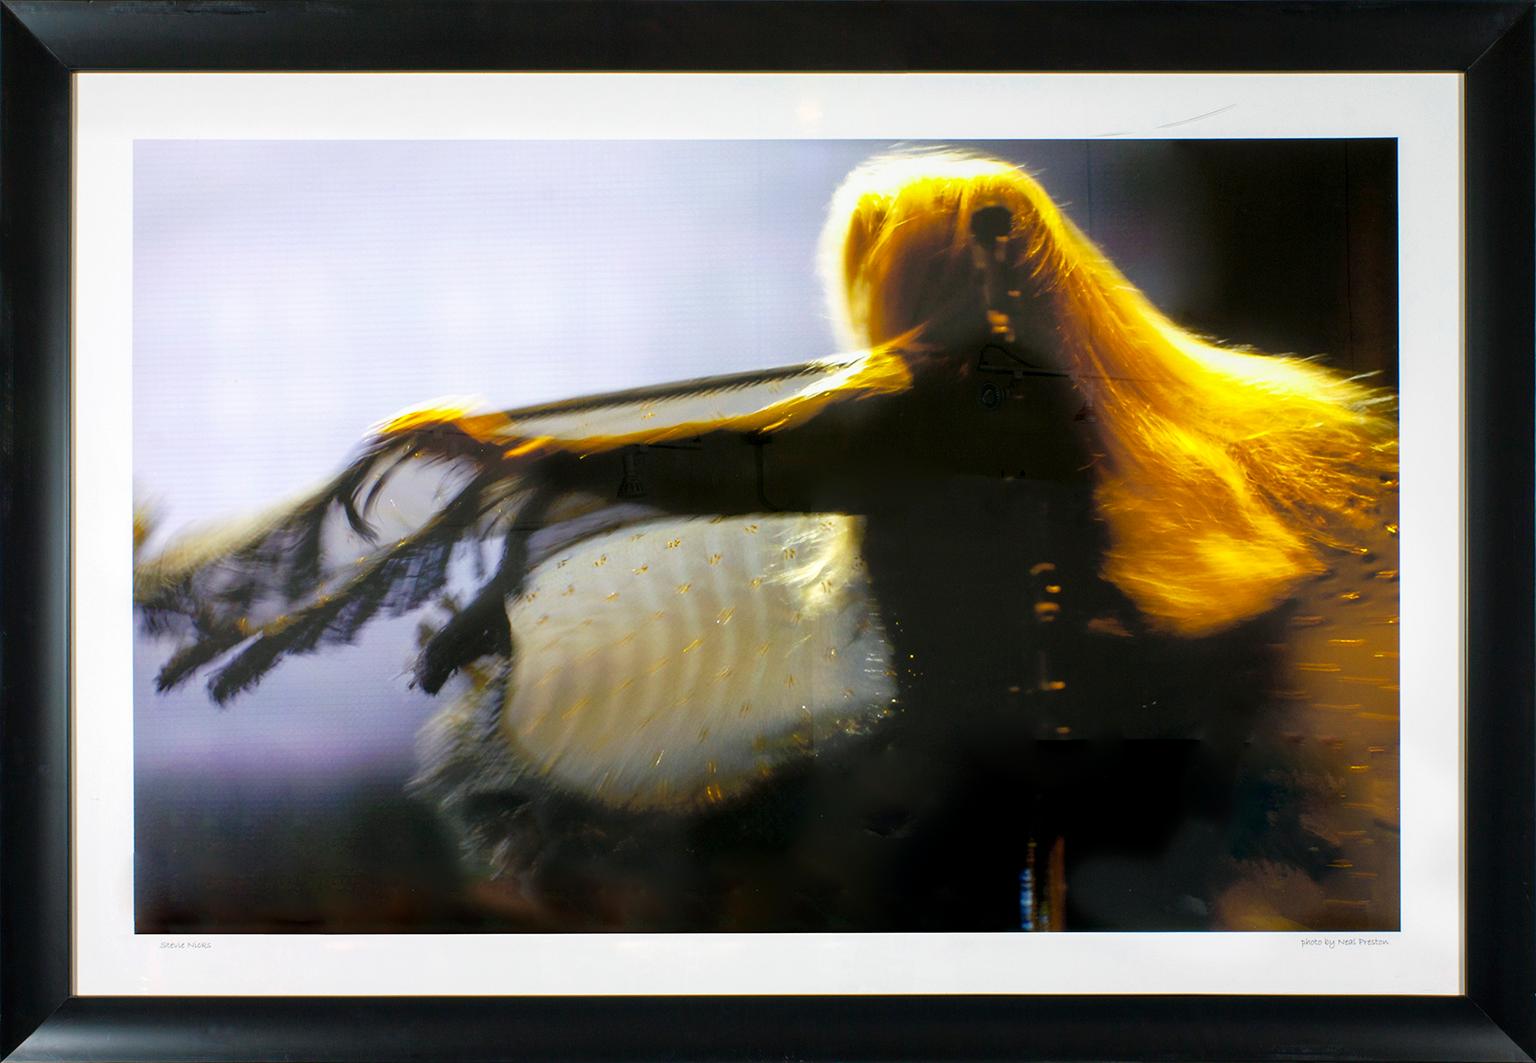 "Stevie Nicks" framed photograph by Neal Preston. Image size: 33 1/4 x 53 1/4. "Stevie Nicks" hand written in front lower left corner. "Photo by Neal Preston" hand written in front lower right corner. This photo was previously displayed in a guest